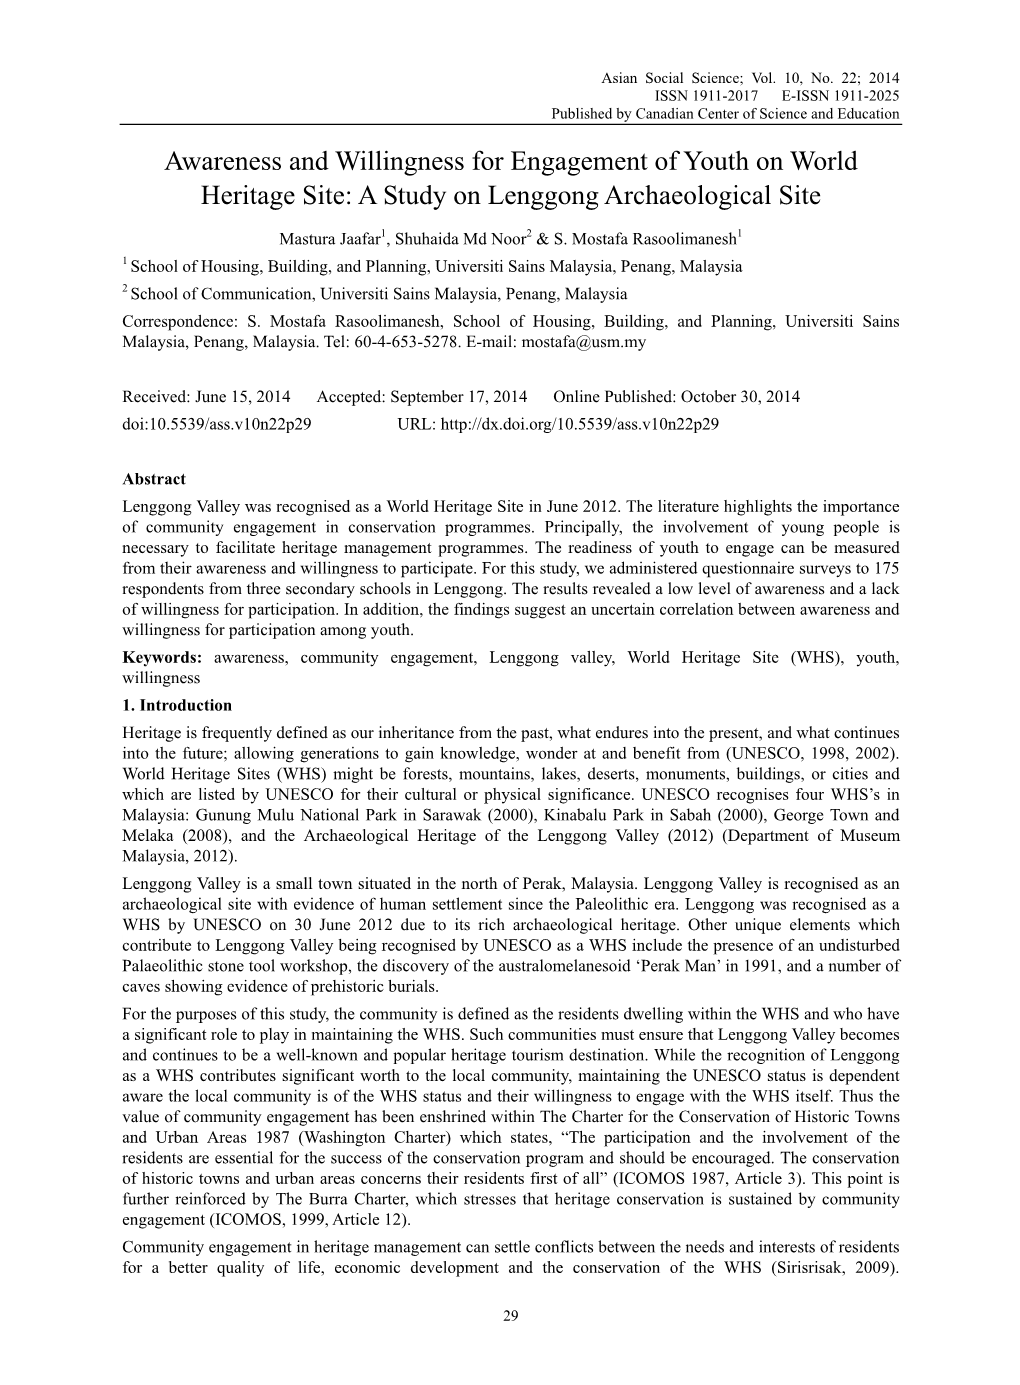 Awareness and Willingness for Engagement of Youth on World Heritage Site: a Study on Lenggong Archaeological Site